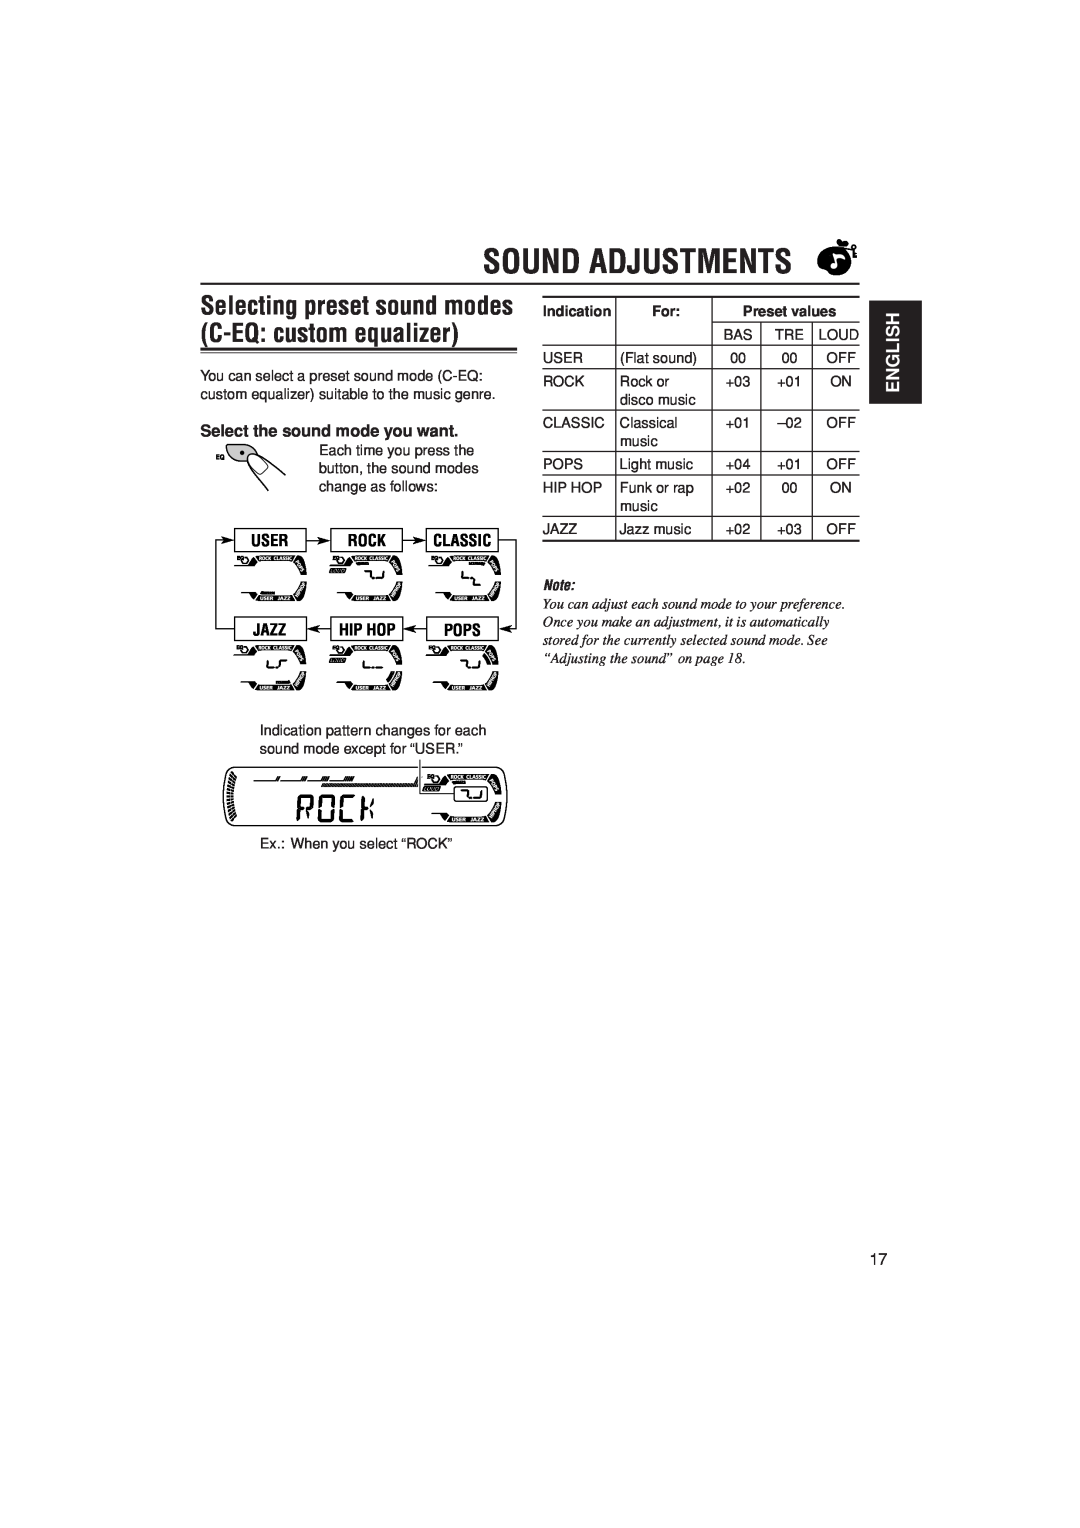 JVC KD-G200 Sound Adjustments, Select the sound mode you want, User Rock Classic, Jazz, Hip Hop, Pops, English, Indication 